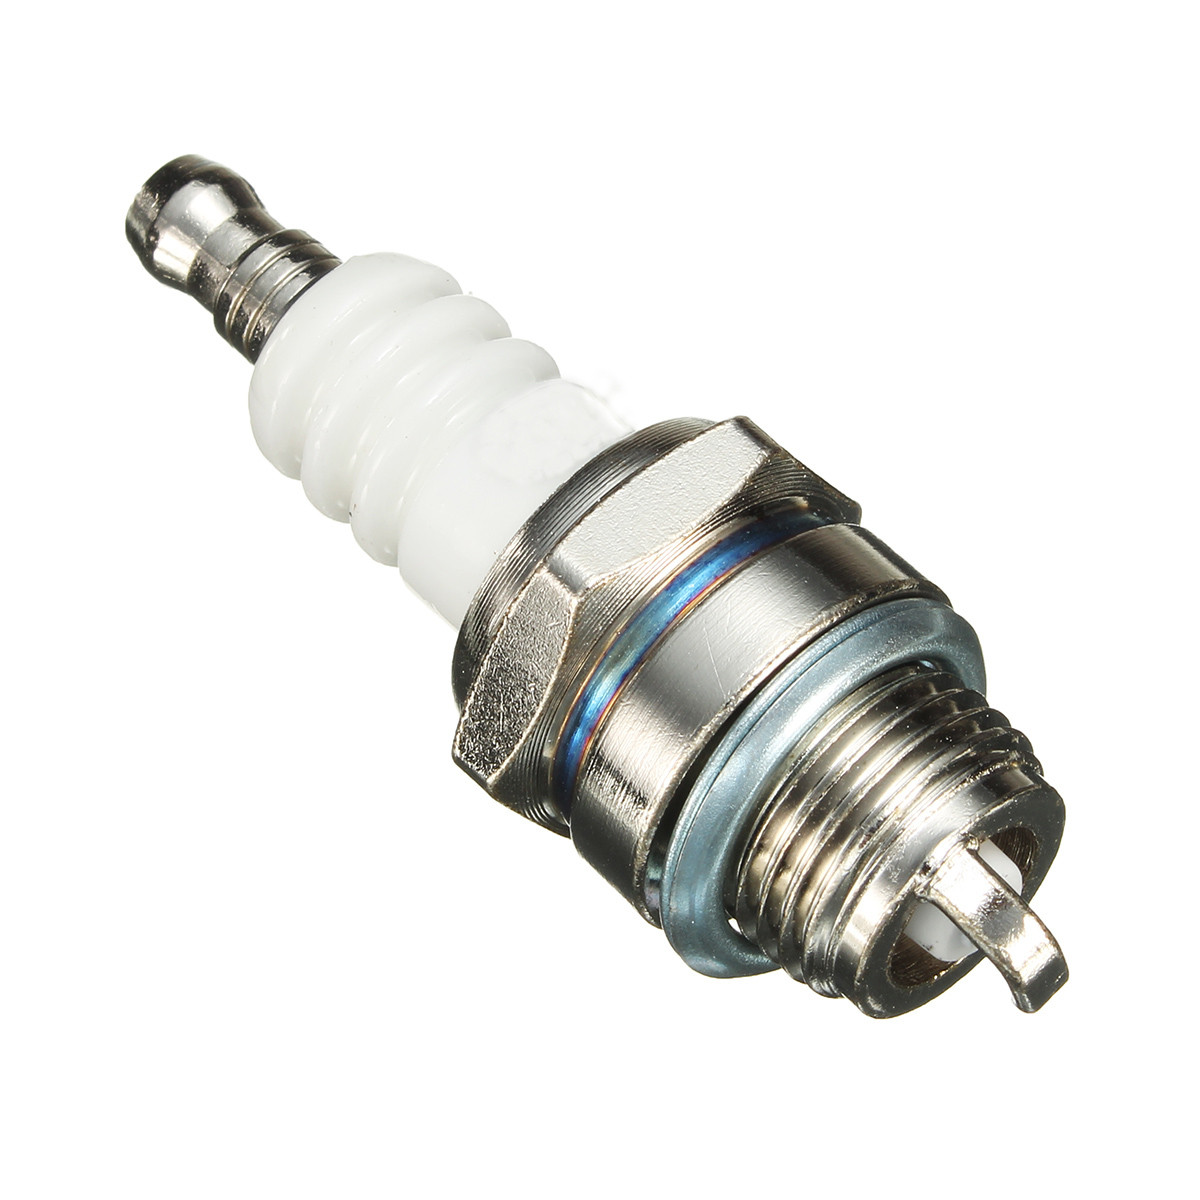 RJ19LM-BR2LM-Lawnmower-Spark-Plug-for-Briggs-and-Stratton-Engines-Motors-1339644-5